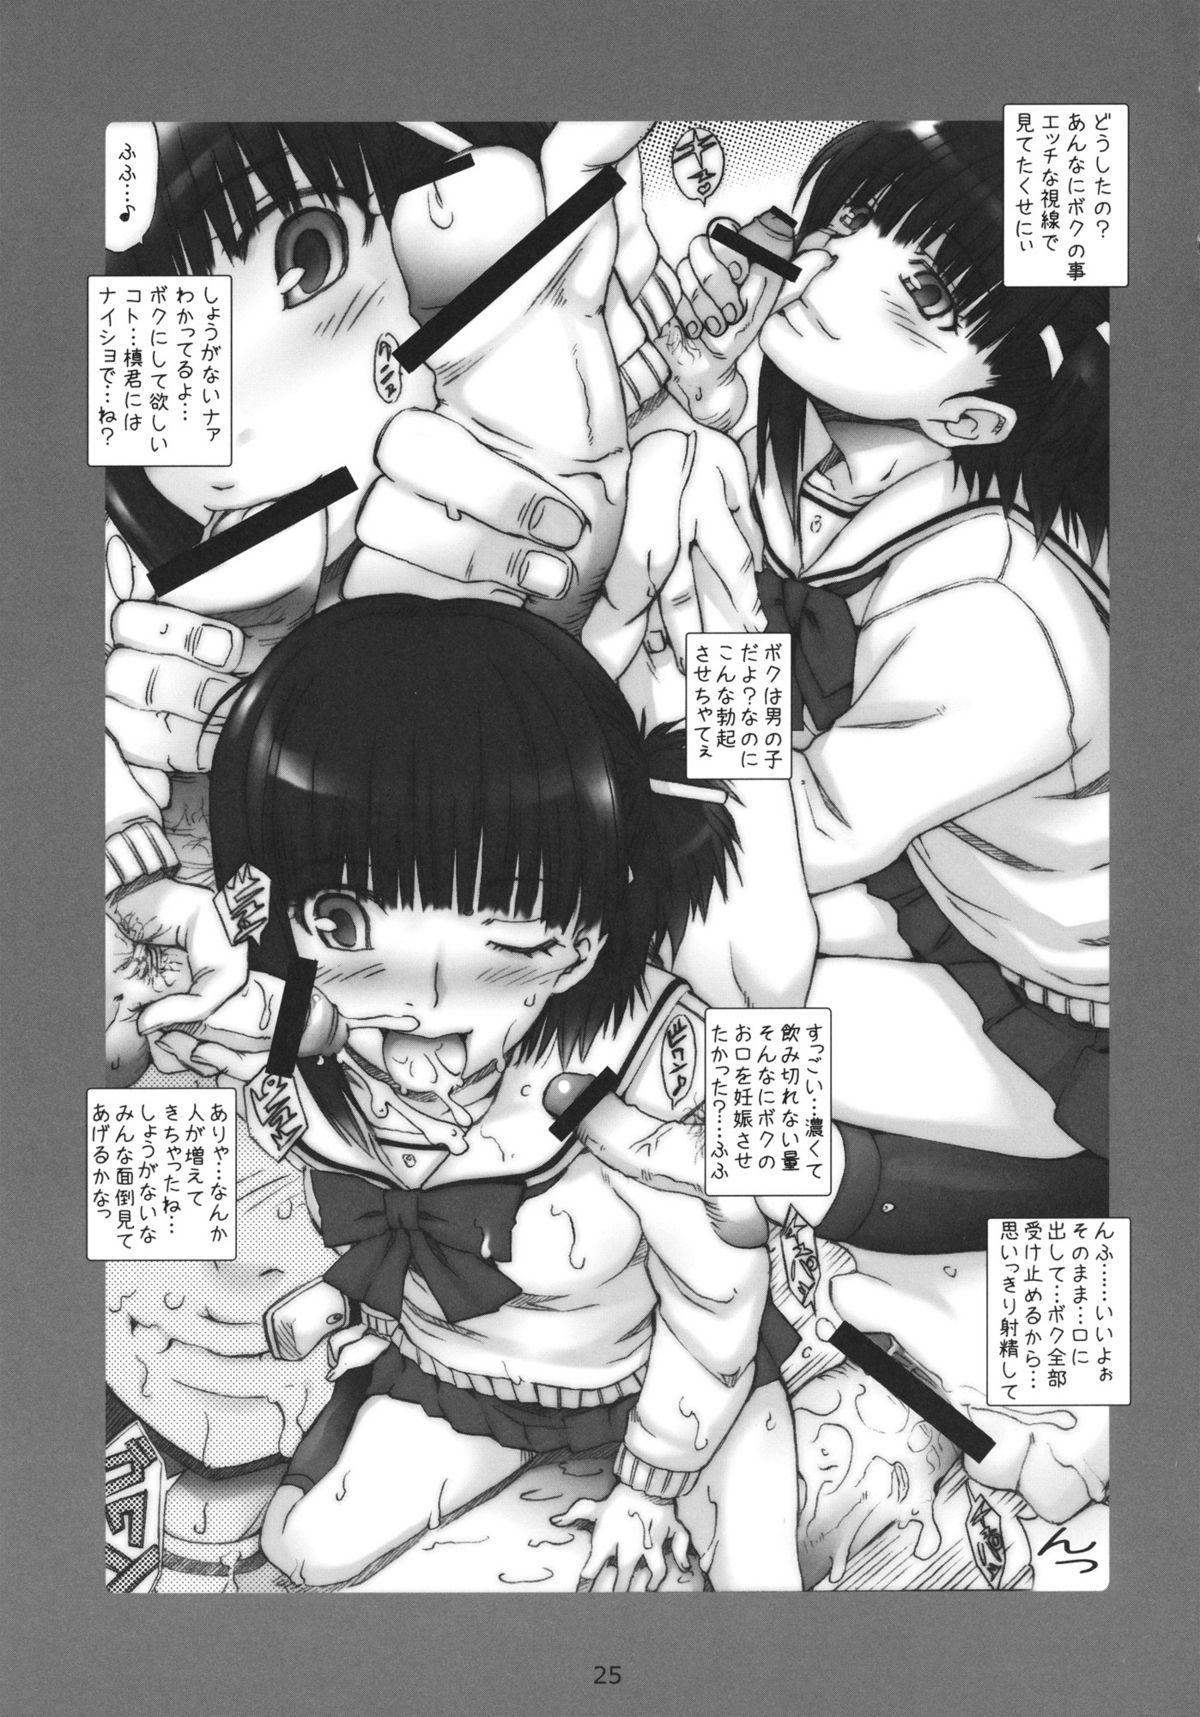 Hardcore One After Another. - Prunus girl Cojiendo - Page 24